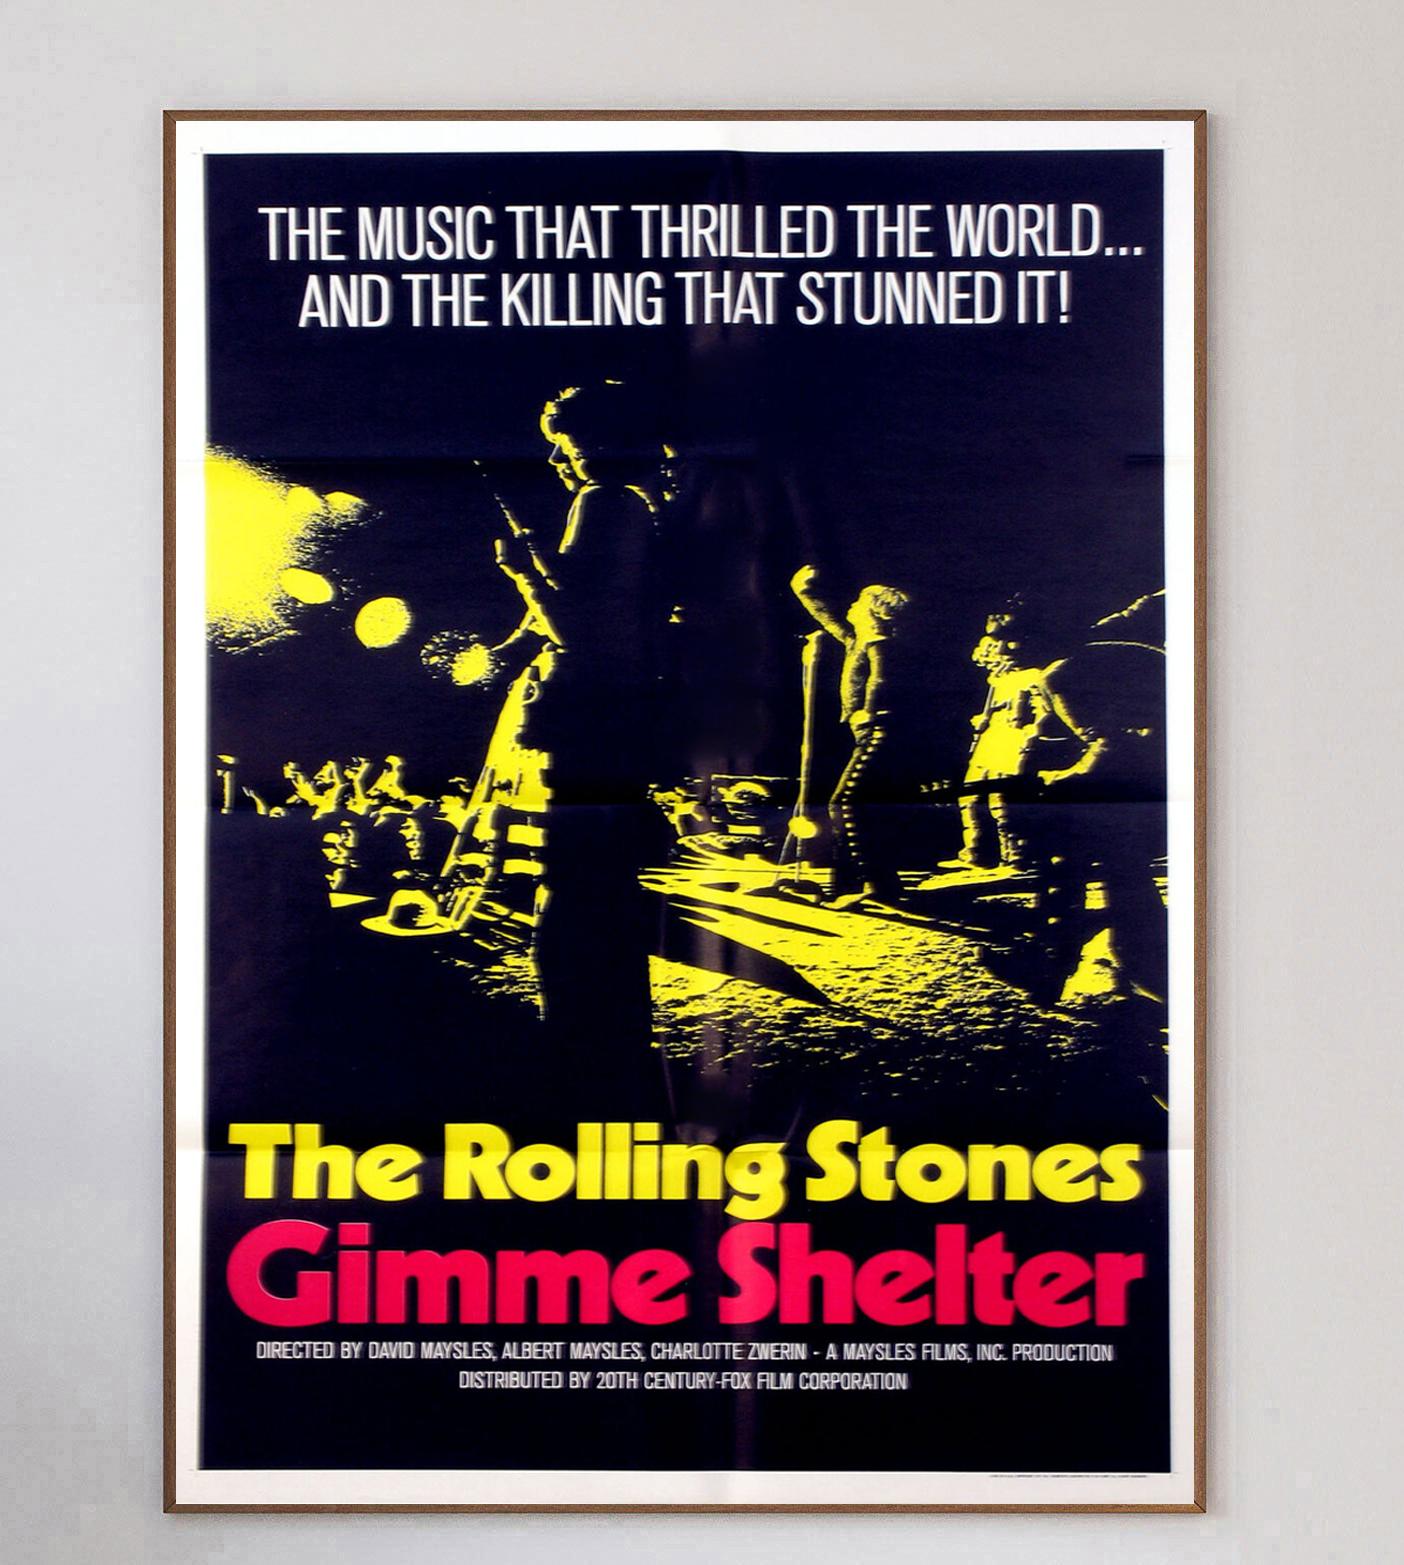 Conceived as a documentary following the final weeks of The Rolling Stones' 1969 USA Tour, 